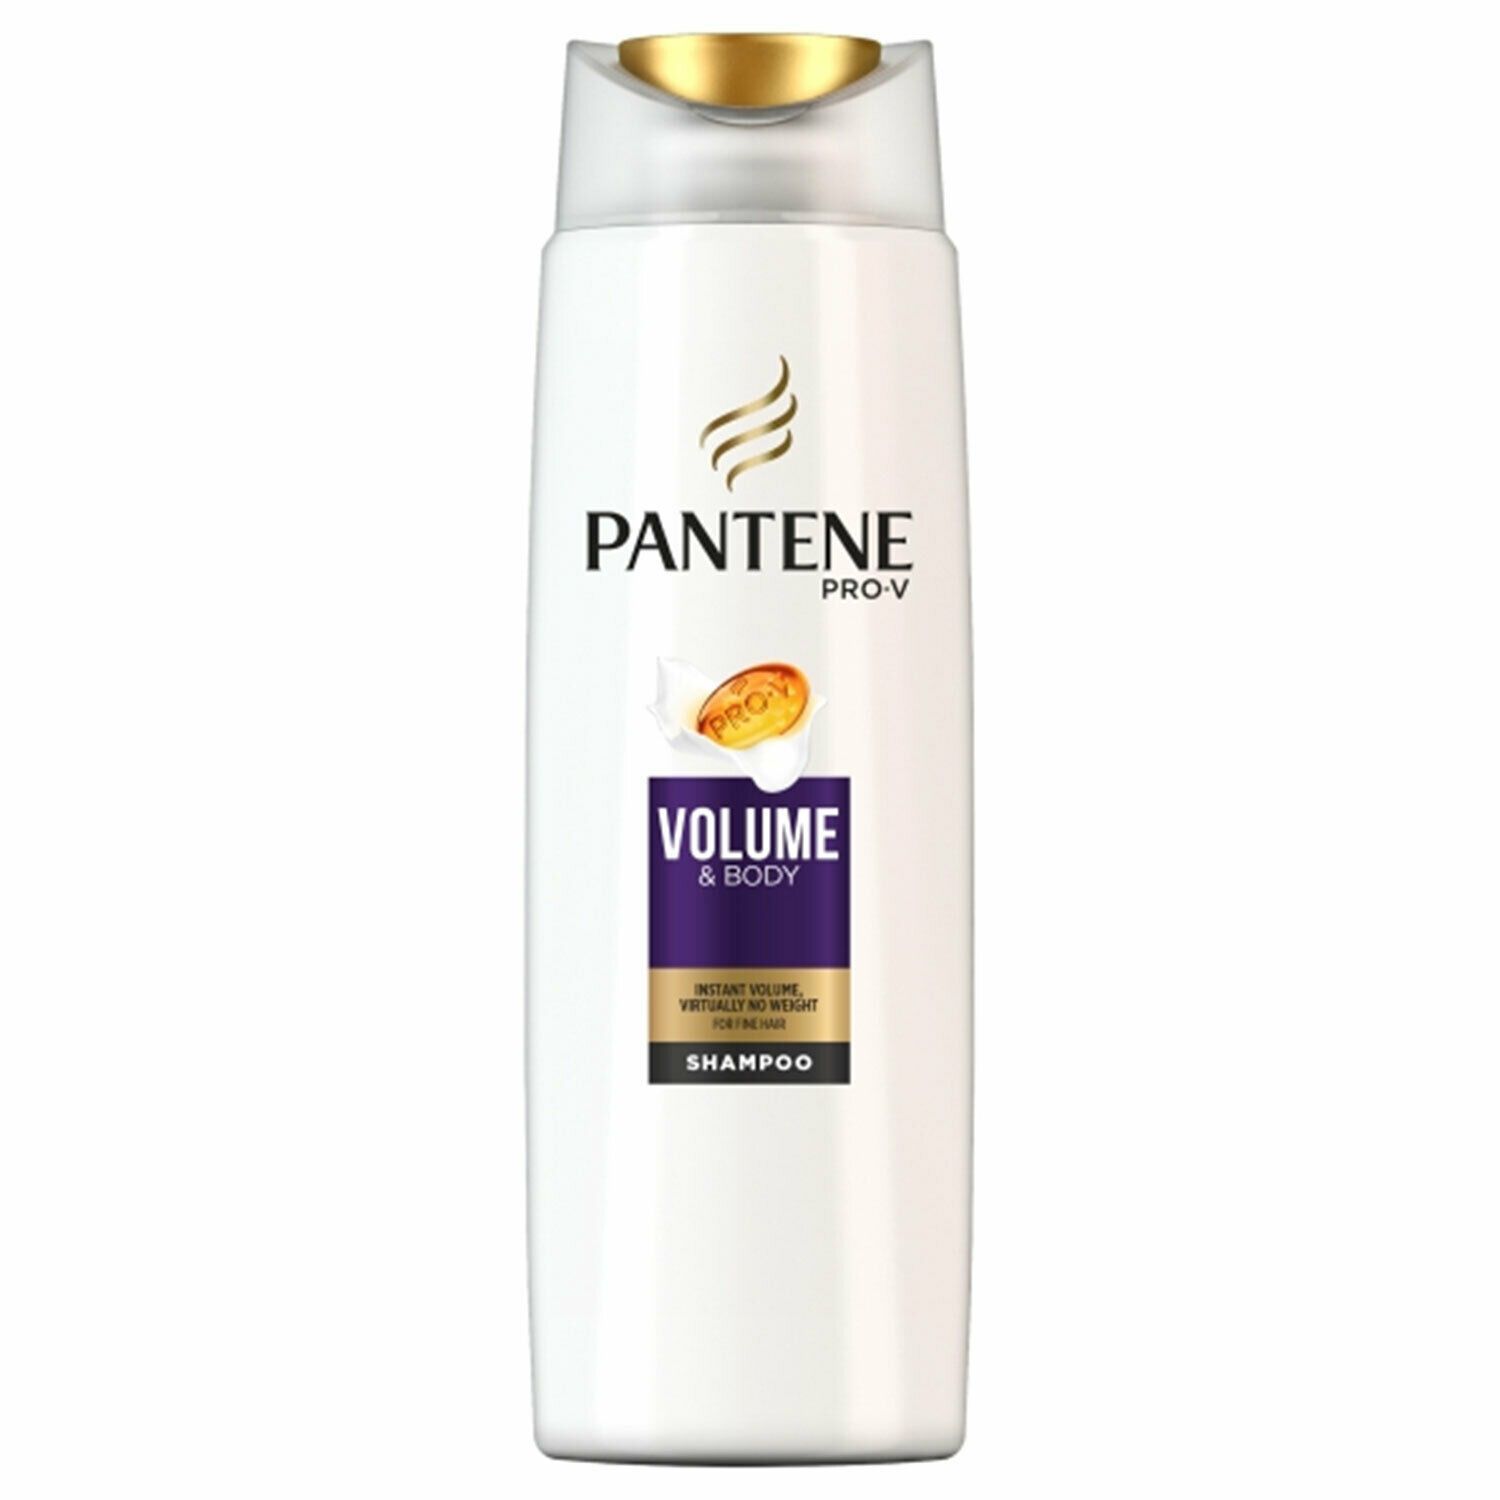 Pantene Pro-V Volume & Body Shampoo and conditioner, specially designed for fine hair, contains micro-boosters and fortifies your hair, for a healthy look. Features and Benefits Volumizing Shampoo and conditioner for fine hair. Leaves your hair healthy-looking with lightweight body and shine. Helps fortify your fine hair to its full volume potential and protect it from styling damage.